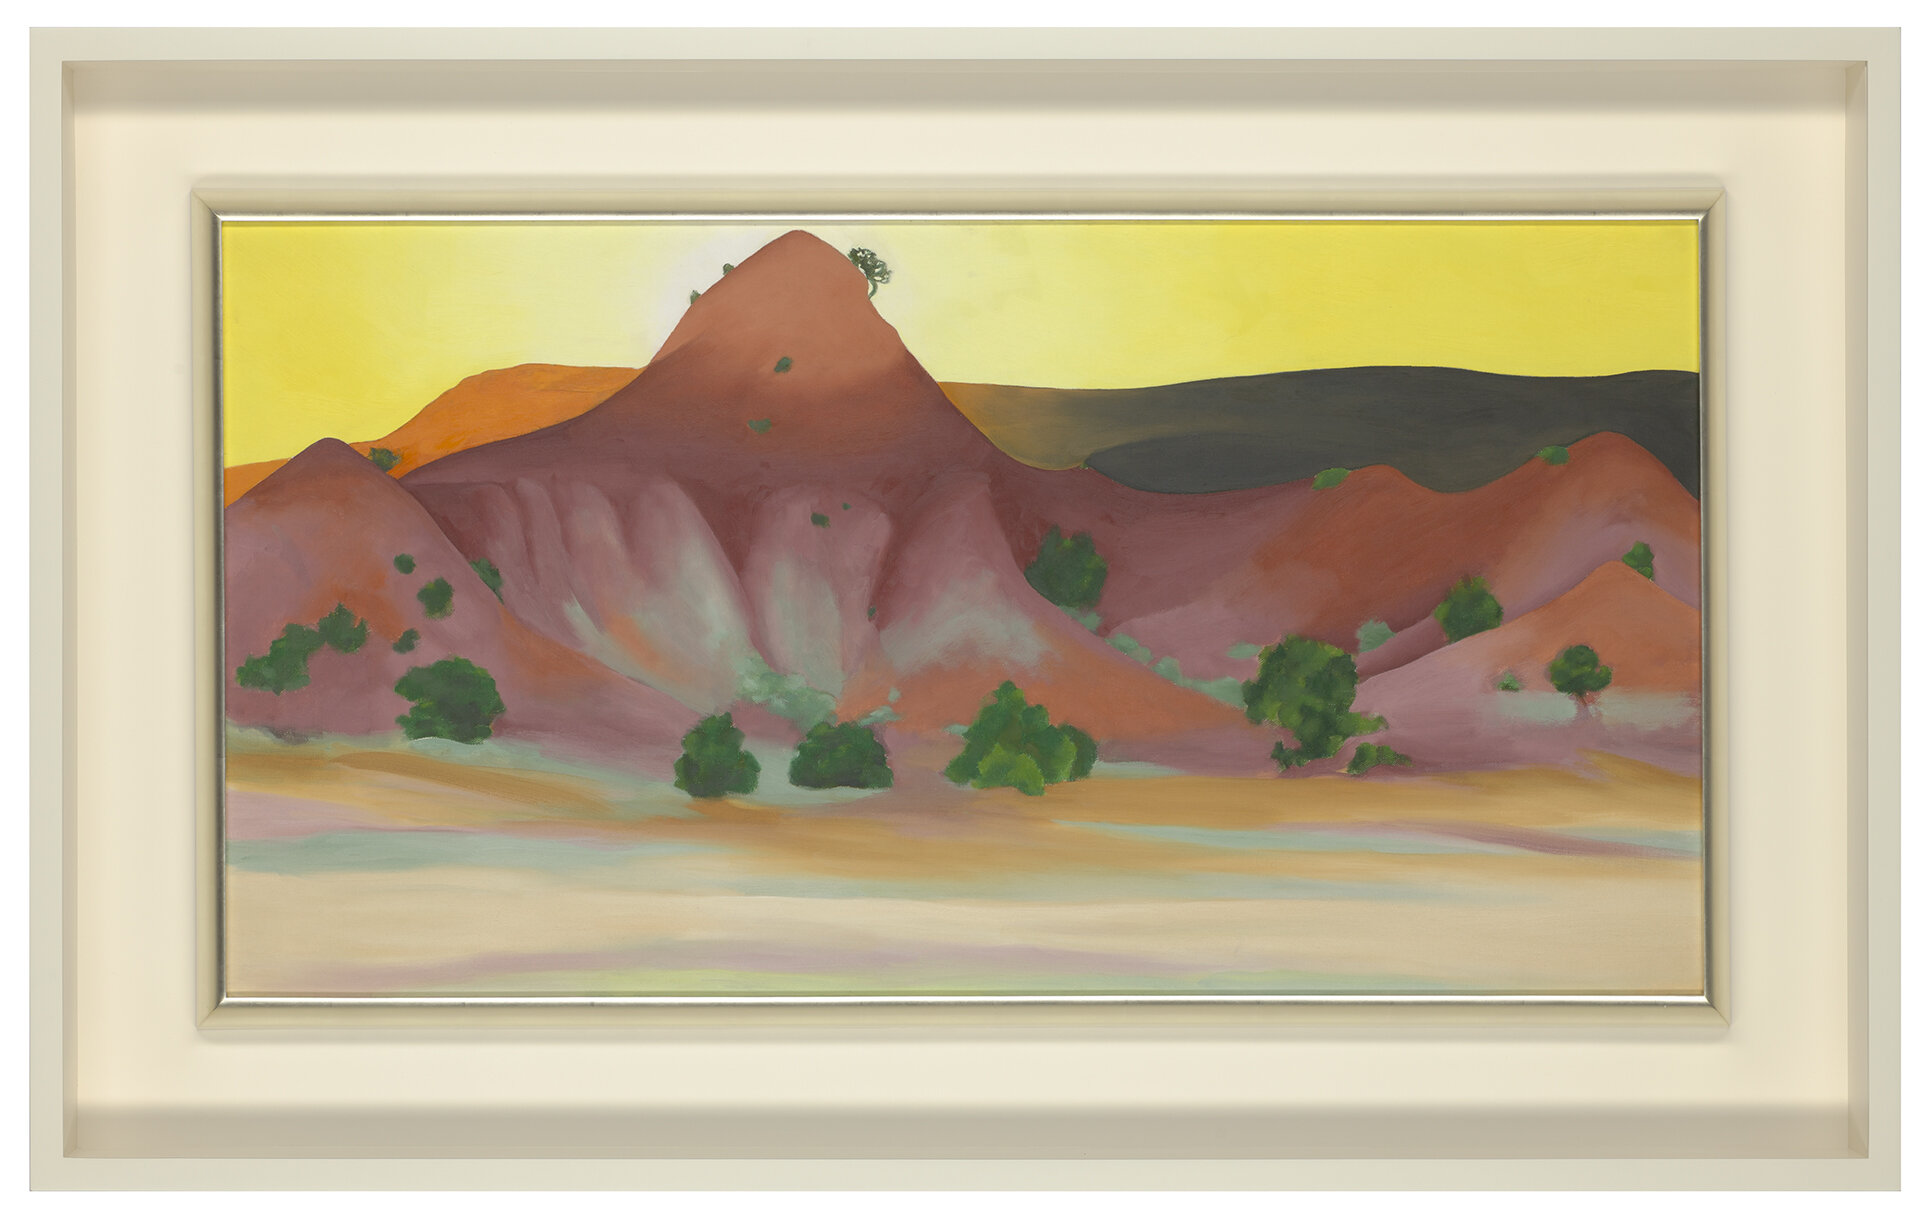  GEORGIA O’KEEFFE (1887-1986)   Hills and Mesa to the West , 1945. Oil on canvas. 19 x 36 inches. 